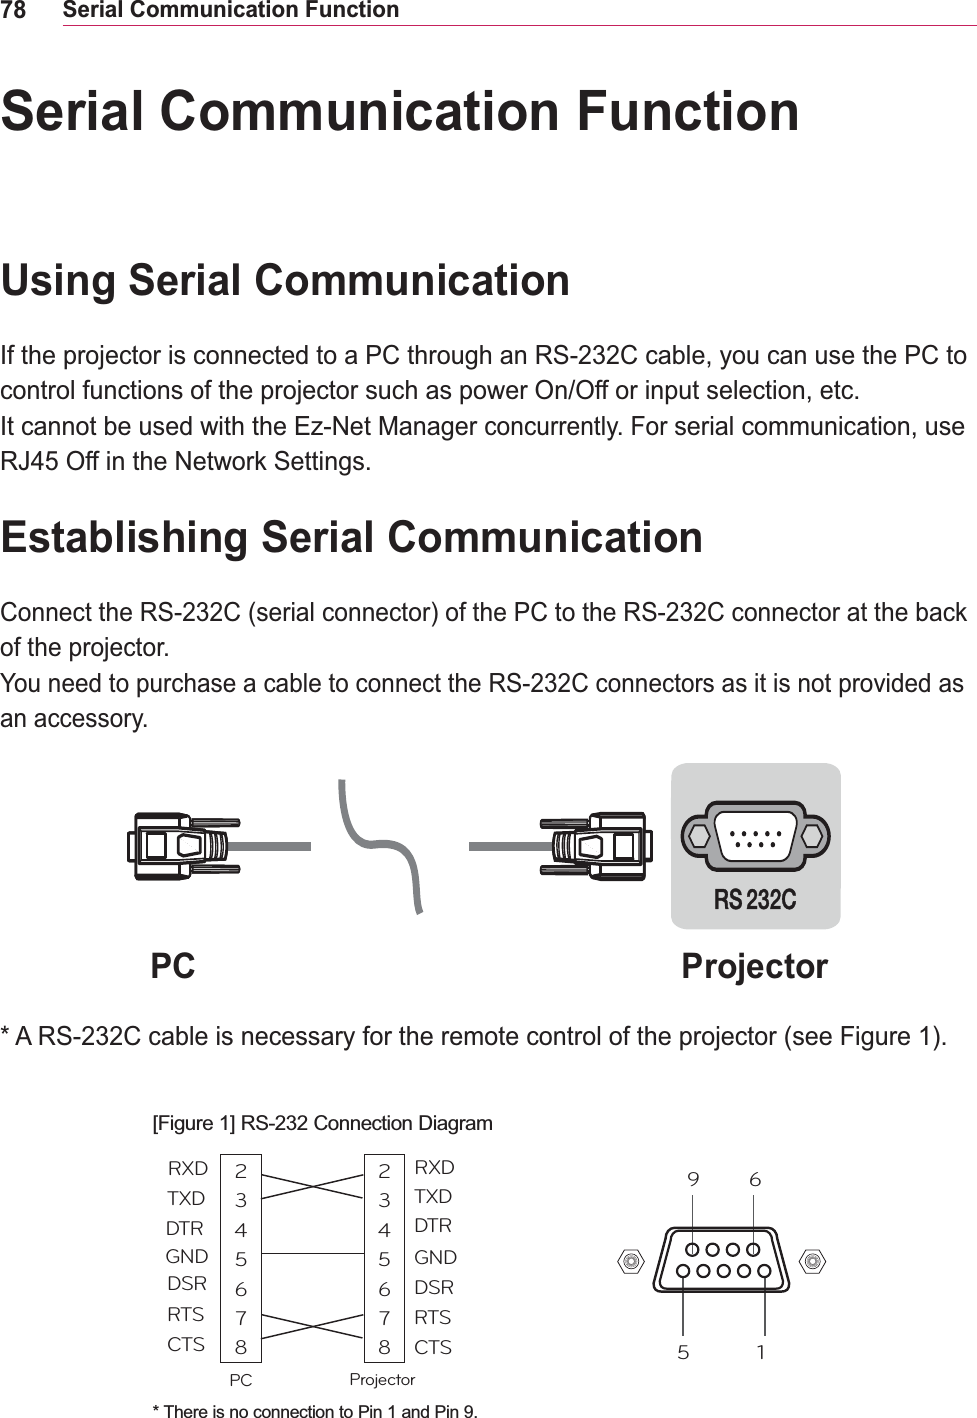 78Serial Communication Function Serial Communication FunctionUsing Serial CommunicationIf the projector is connected to a PC through an RS-232C cable, you can use the PC to control functions of the projector such as power On/Off or input selection, etc.It cannot be used with the Ez-Net Manager concurrently. For serial communication, use RJ45 Off in the Network Settings.Establishing Serial CommunicationConnect the RS-232C (serial connector) of the PC to the RS-232C connector at the back of the projector.You need to purchase a cable to connect the RS-232C connectors as it is not provided as an accessory.2345678PCRXDTXDDTRGNDDSRRTSCTSRXD 9615TXDDTRGNDDSRRTSCTSProjector2345678PC Projector